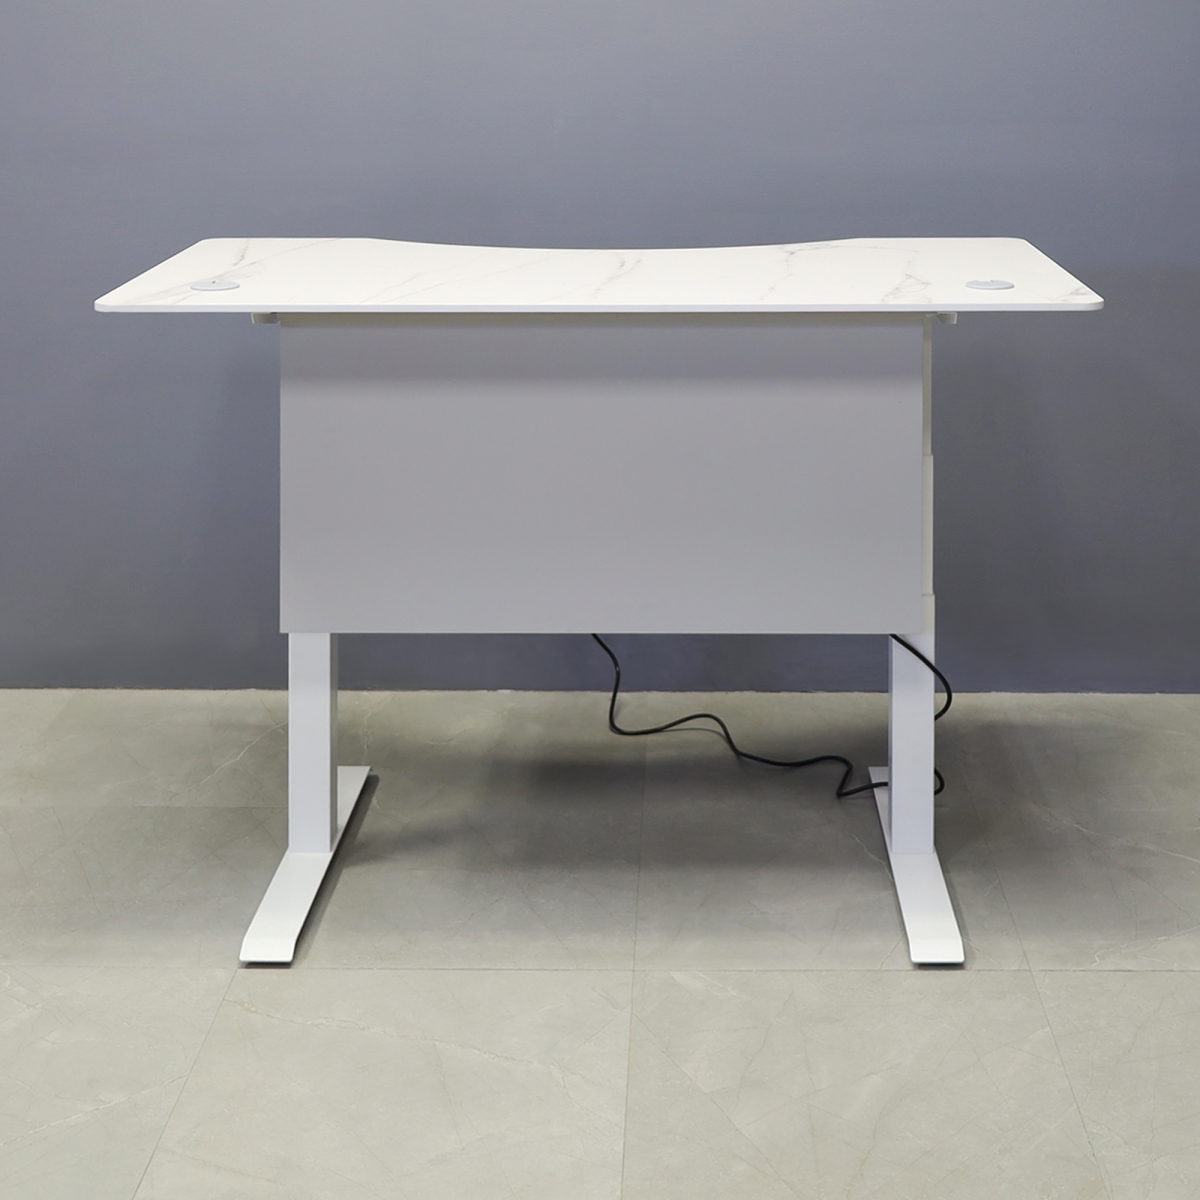 aXis Sit-stand Executive Desk with Solenne Marble Engieered Stone Top - 60 In. - Stock #26